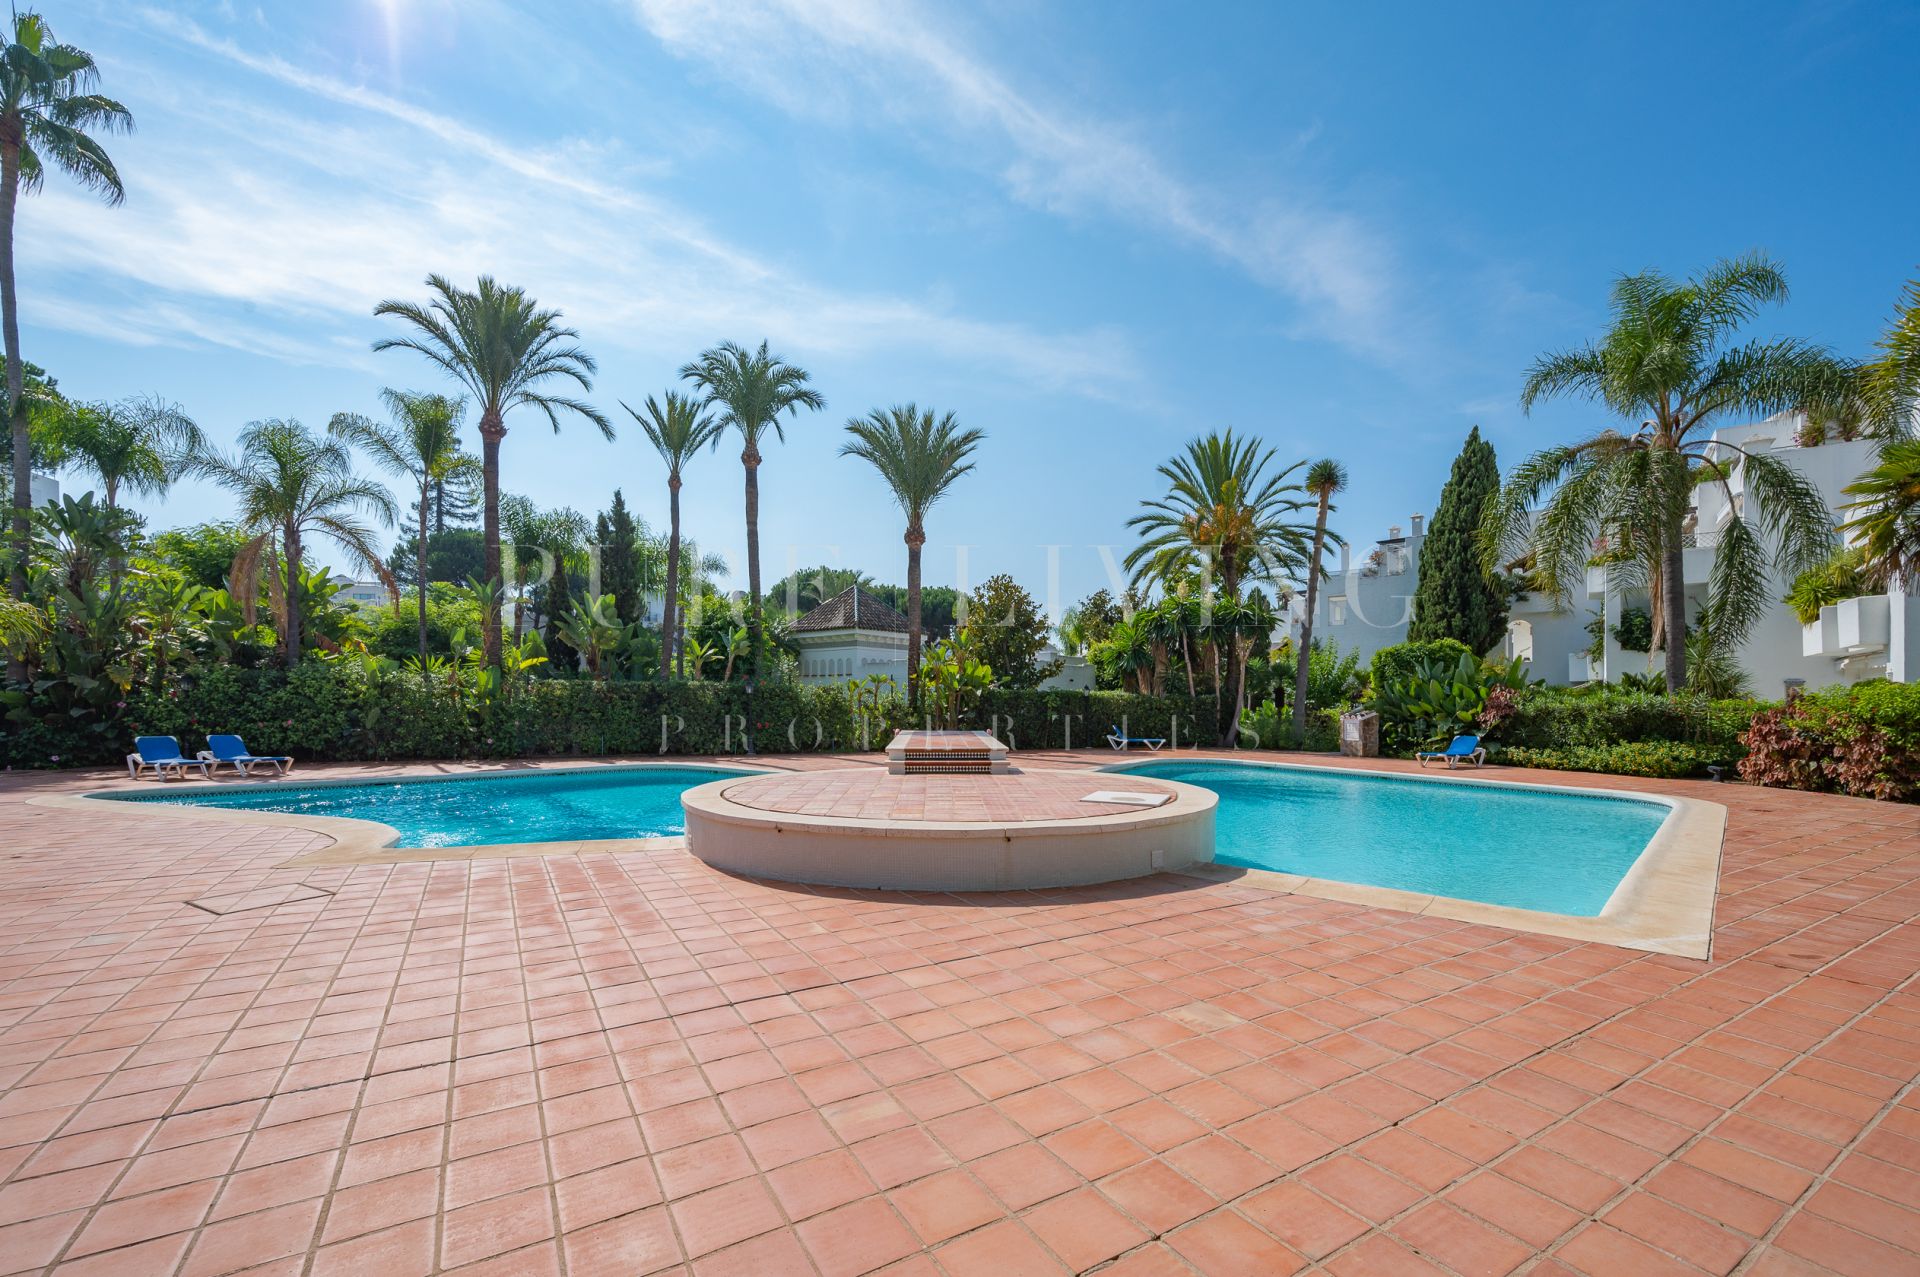 Two-bedroom apartment close to the beach in Alhambra del Mar, Marbella